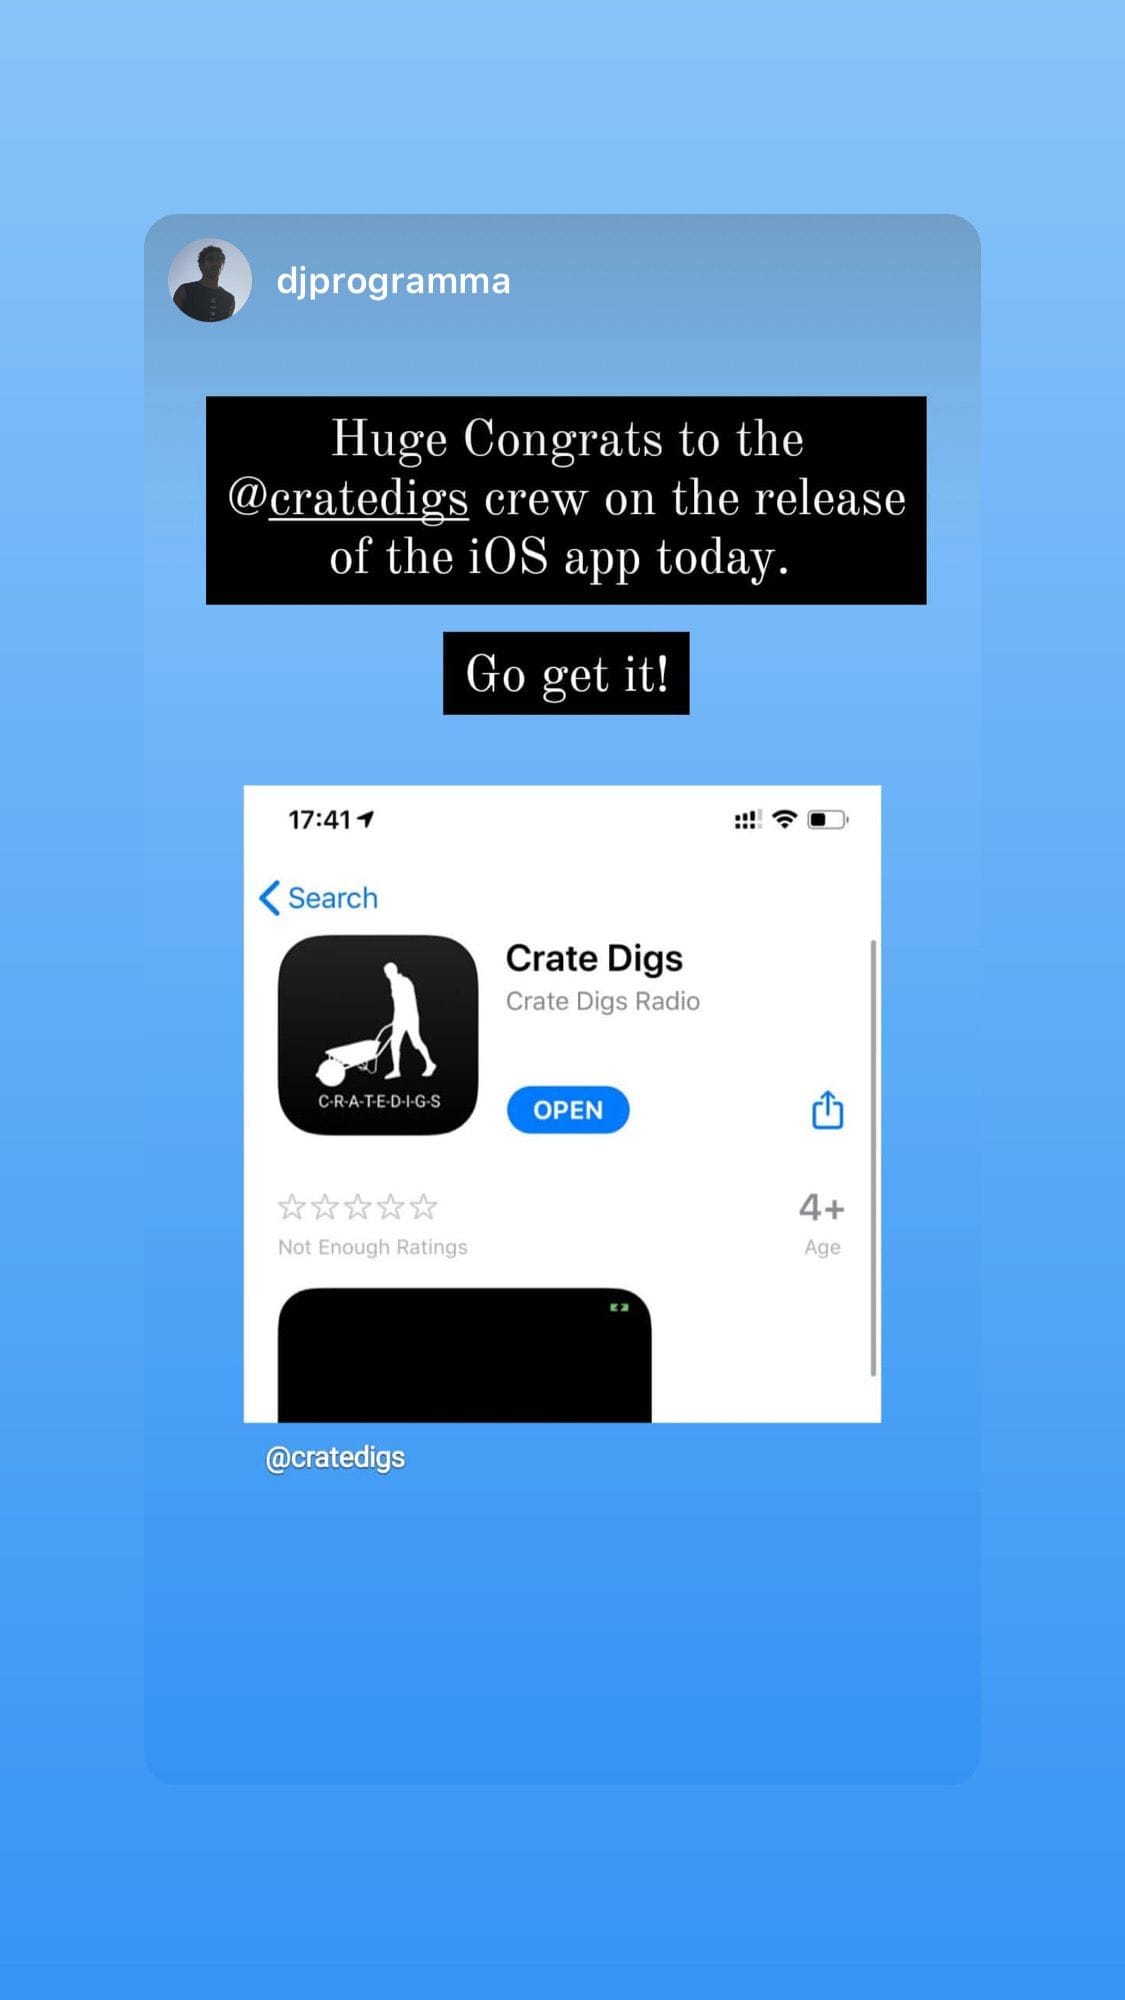 Crate Digs - The early project